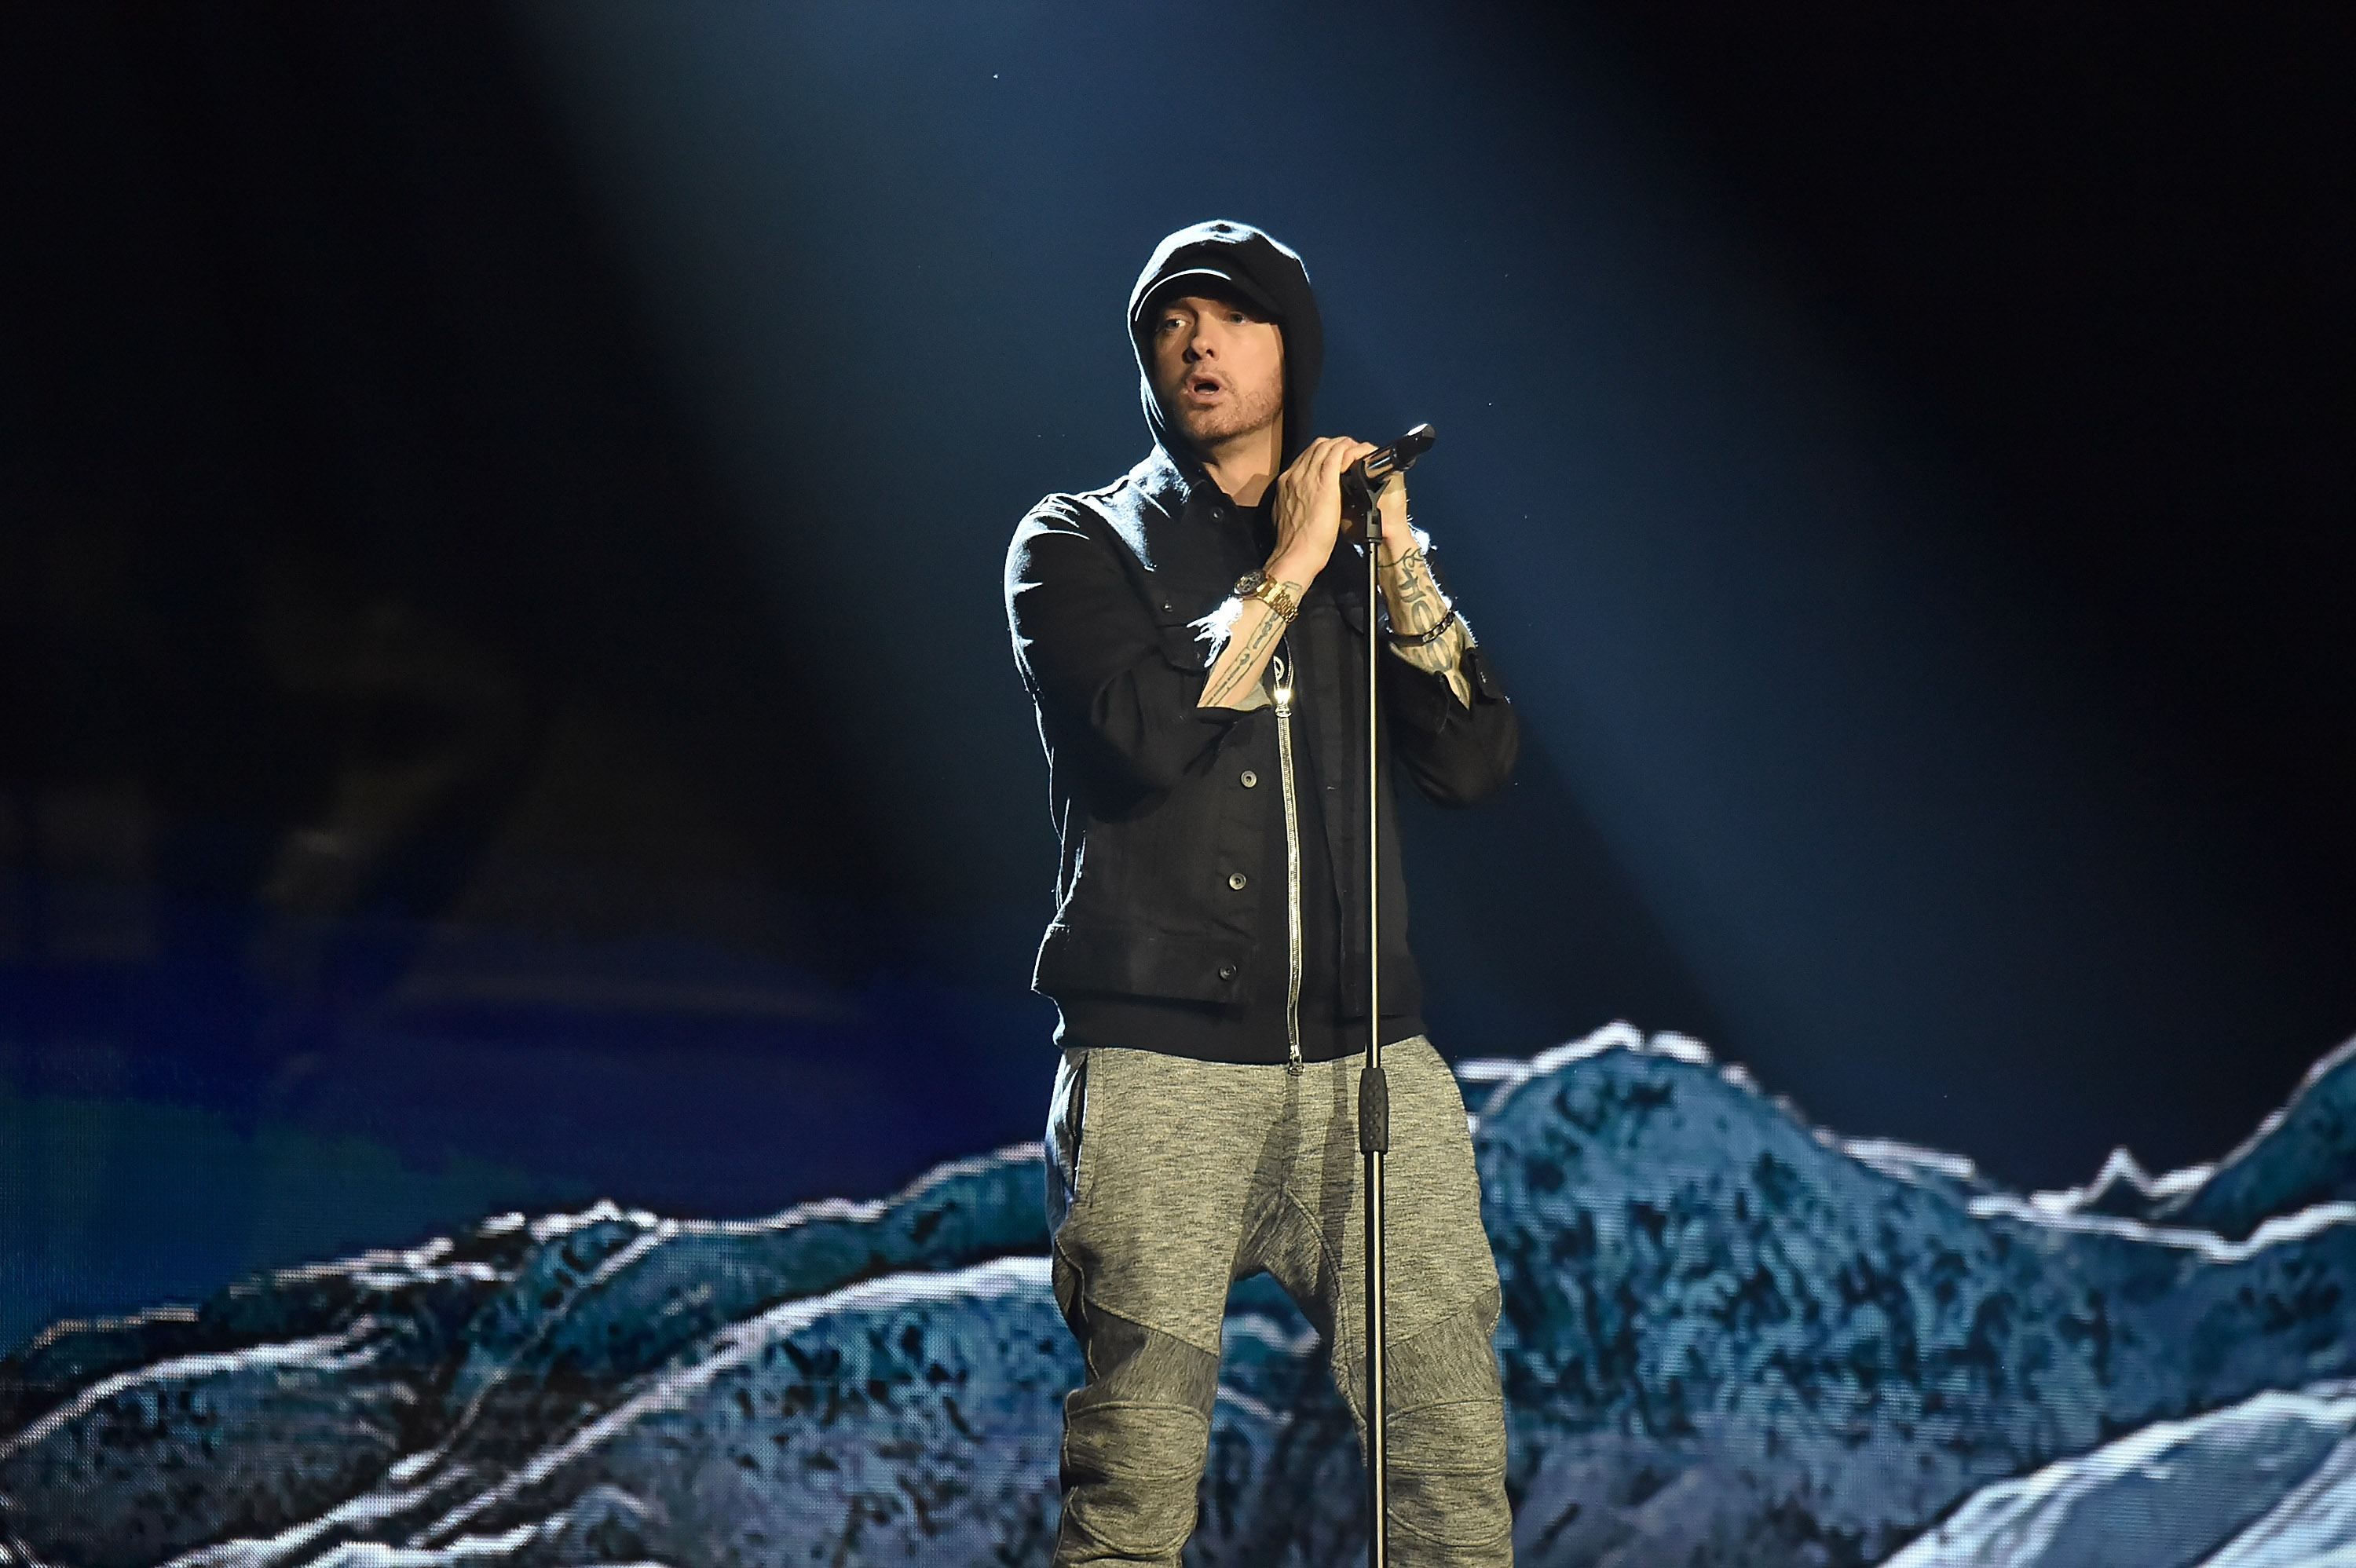 Eminem performs on stage during the MTV EMAs